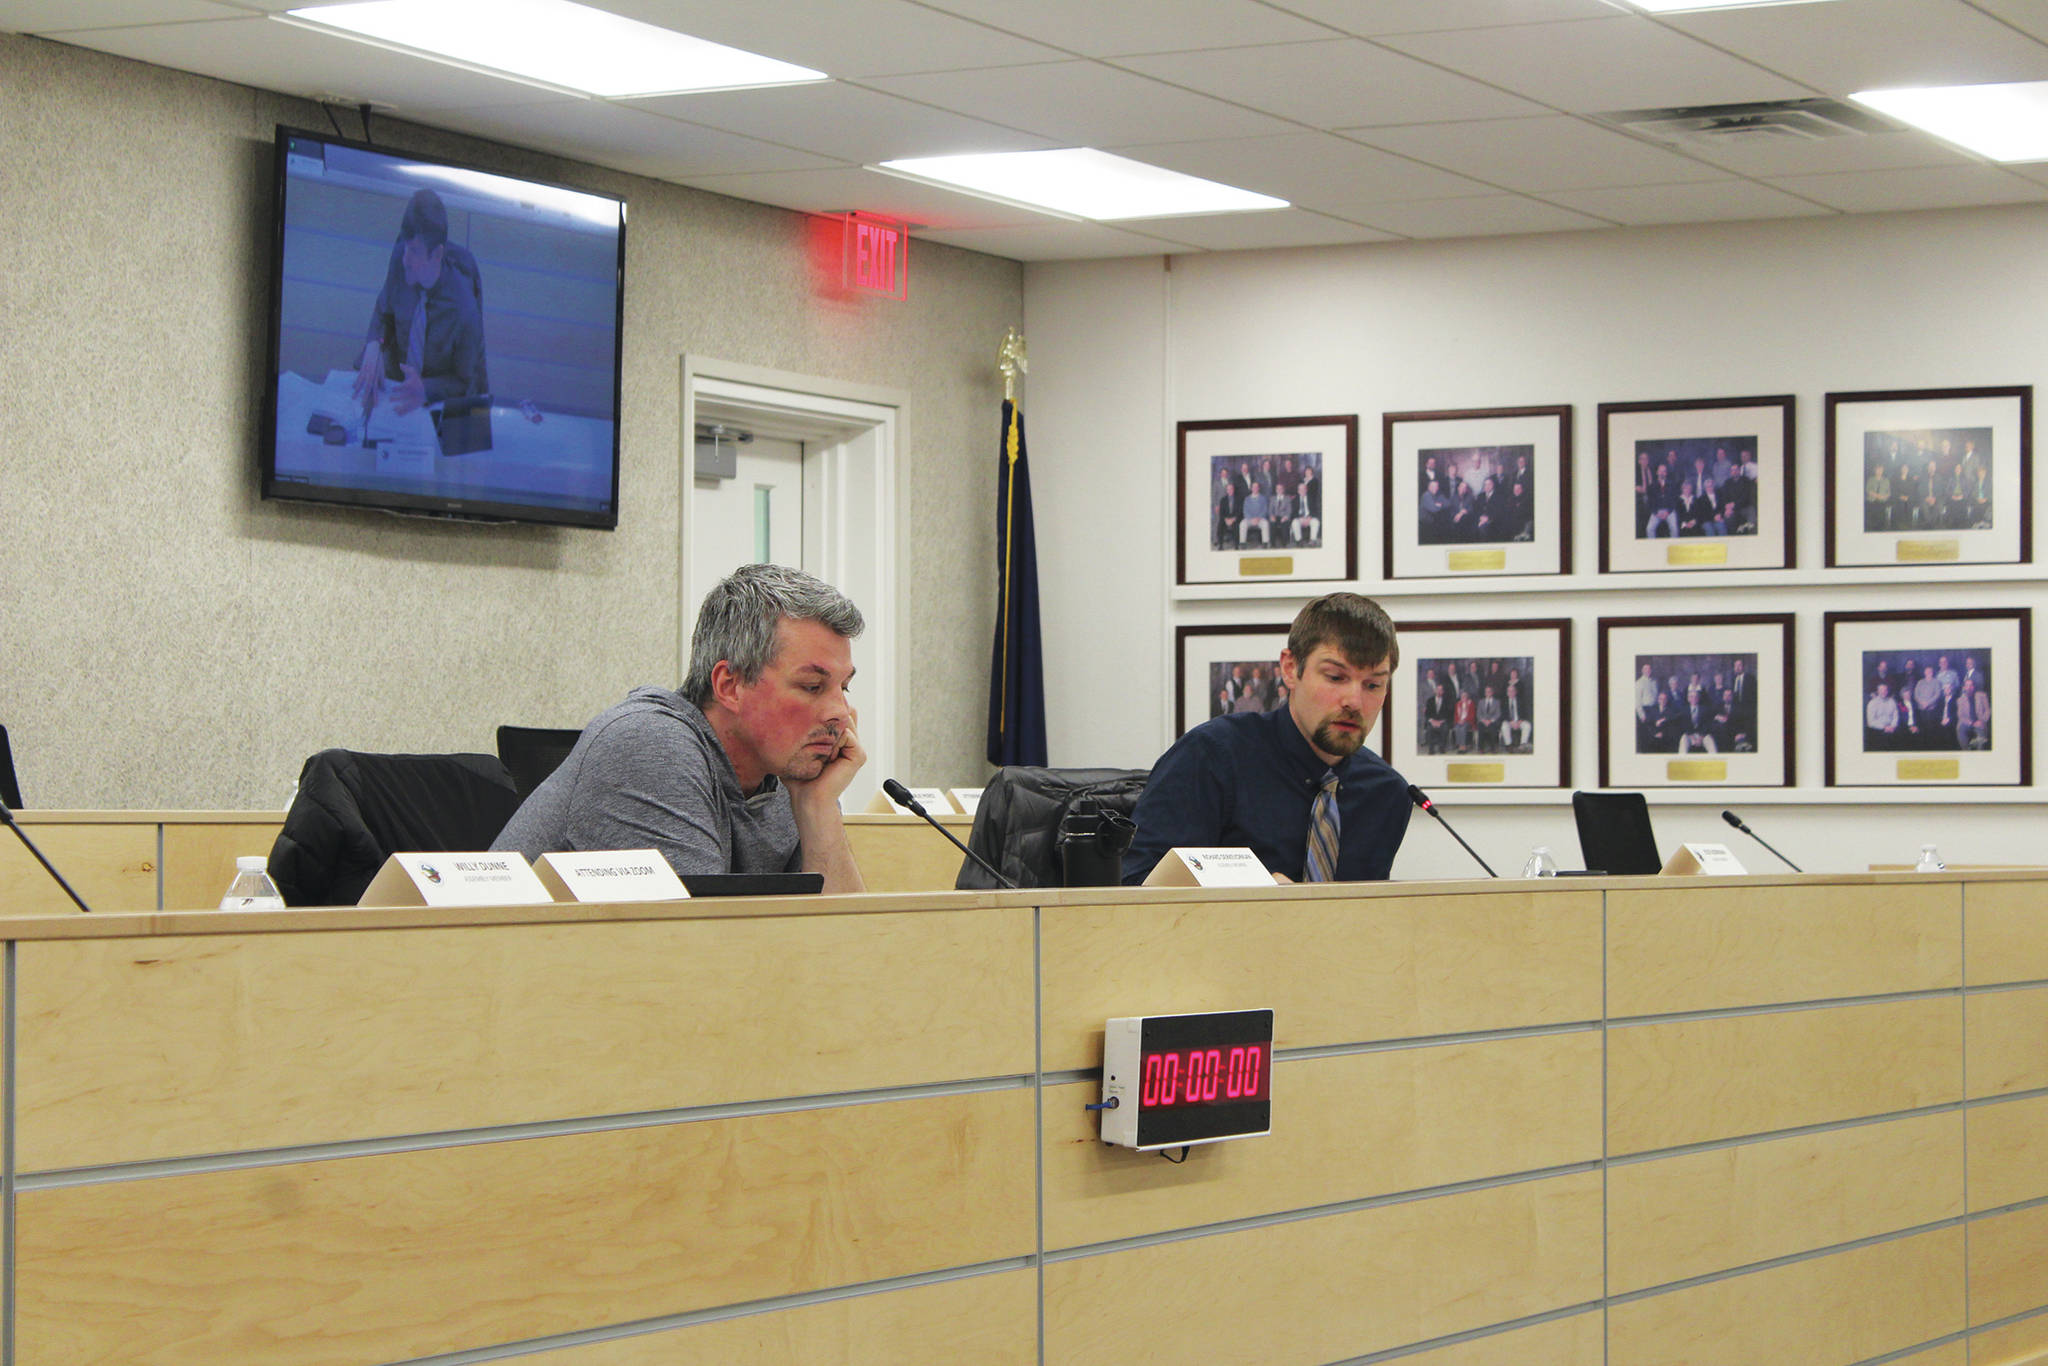 Kenai Peninsula Borough Assembly members Richard Derkevorkian (left) and Jesse Bjorkman (right) participate in the assembly’s Tuesday, Feb. 16, 2021 meeting at the borough assembly chambers in Soldotna, Alaska. The assembly voted Tuesday to fund 13 new positions for four fire and EMS service areas. (Photo by Ashlyn O’Hara/Peninsula Clarion)